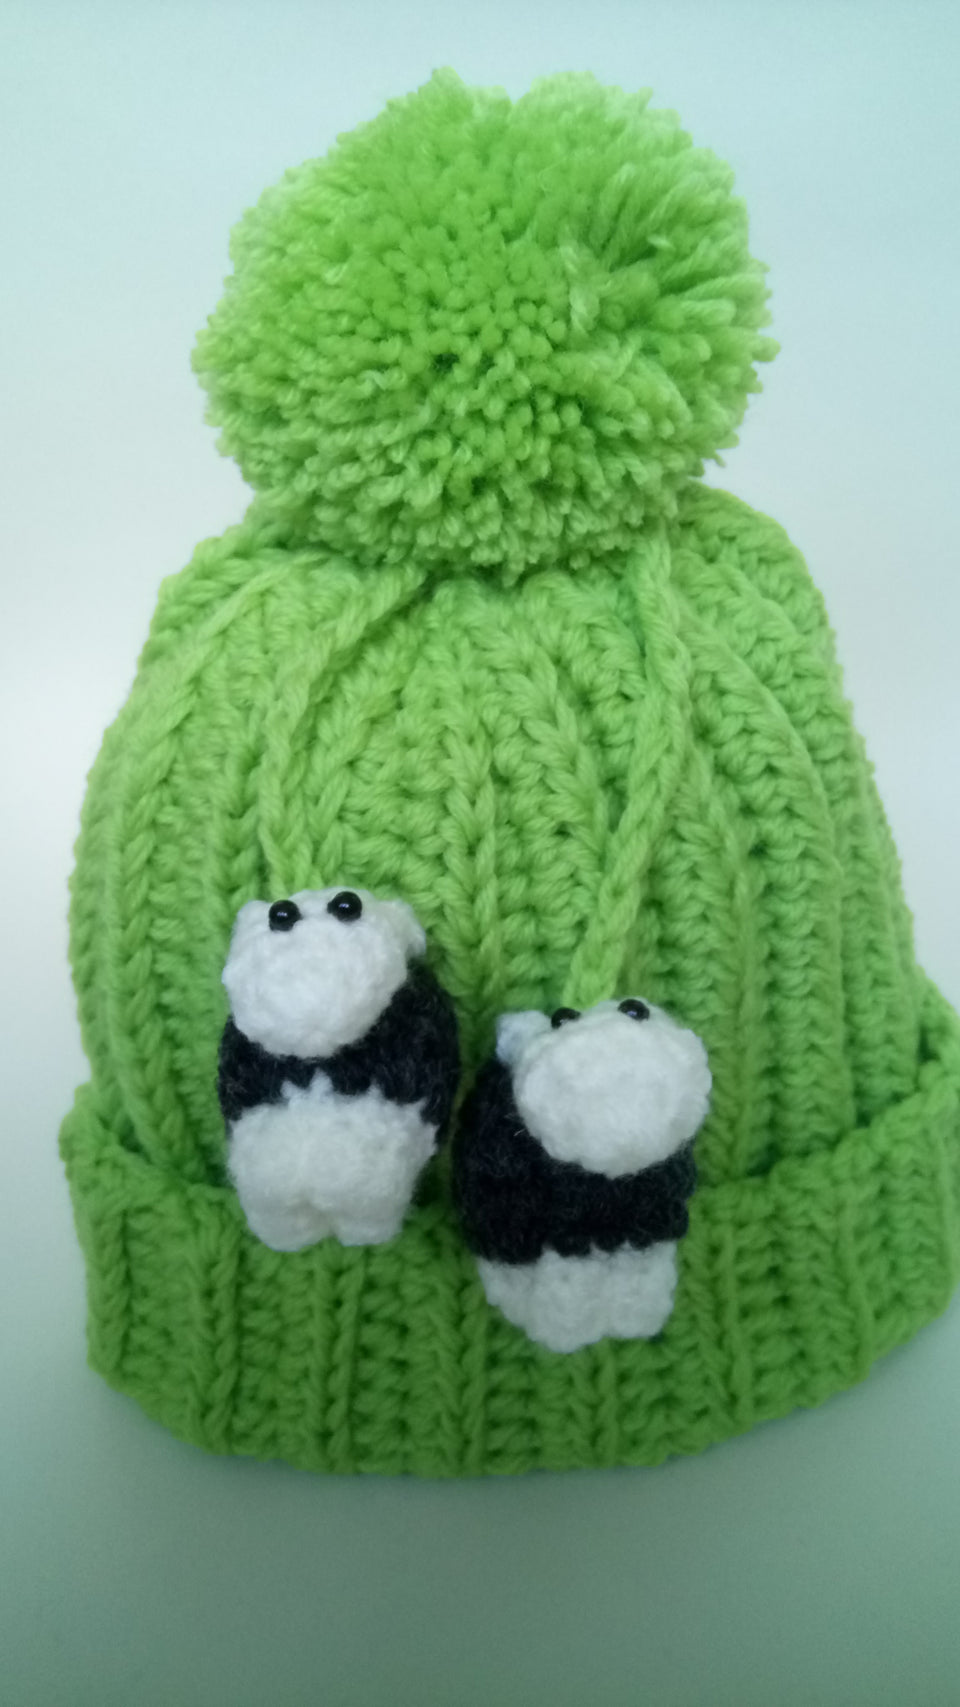 Herdy Hat for Kids - Hand Crocheted